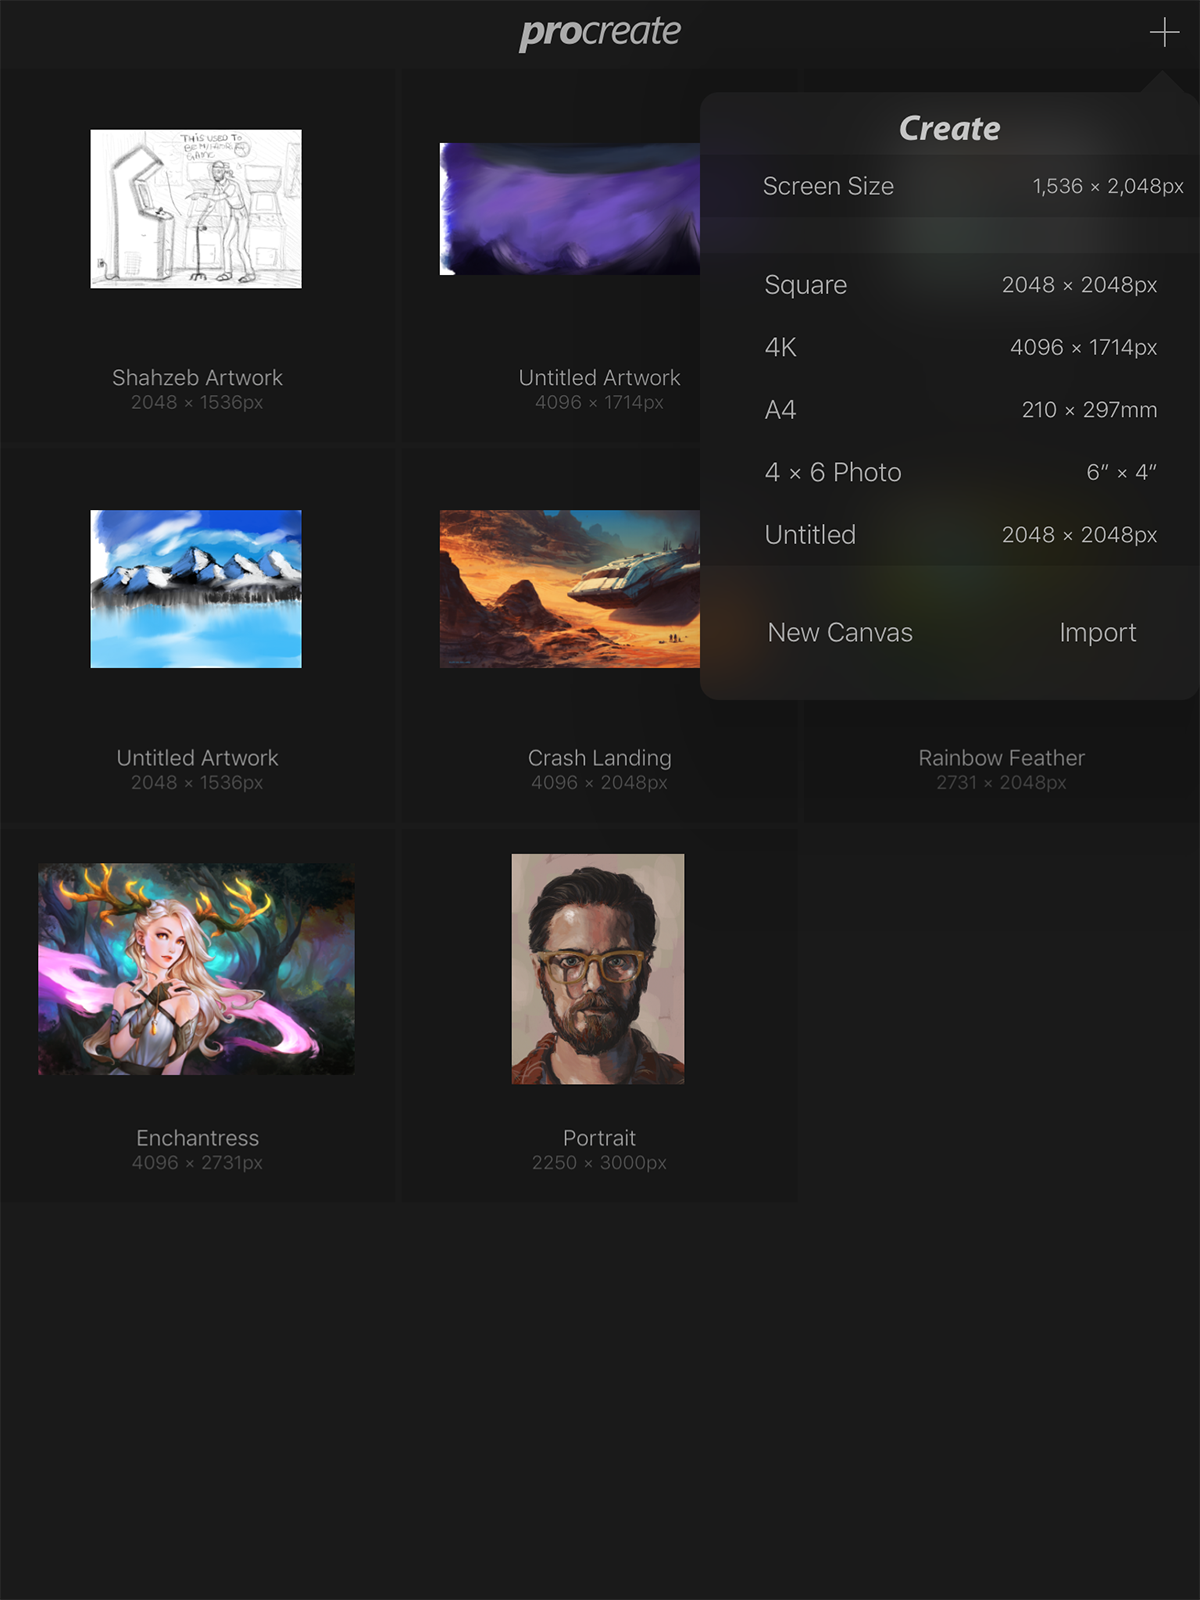 how to get procreate for free 2021 ipad